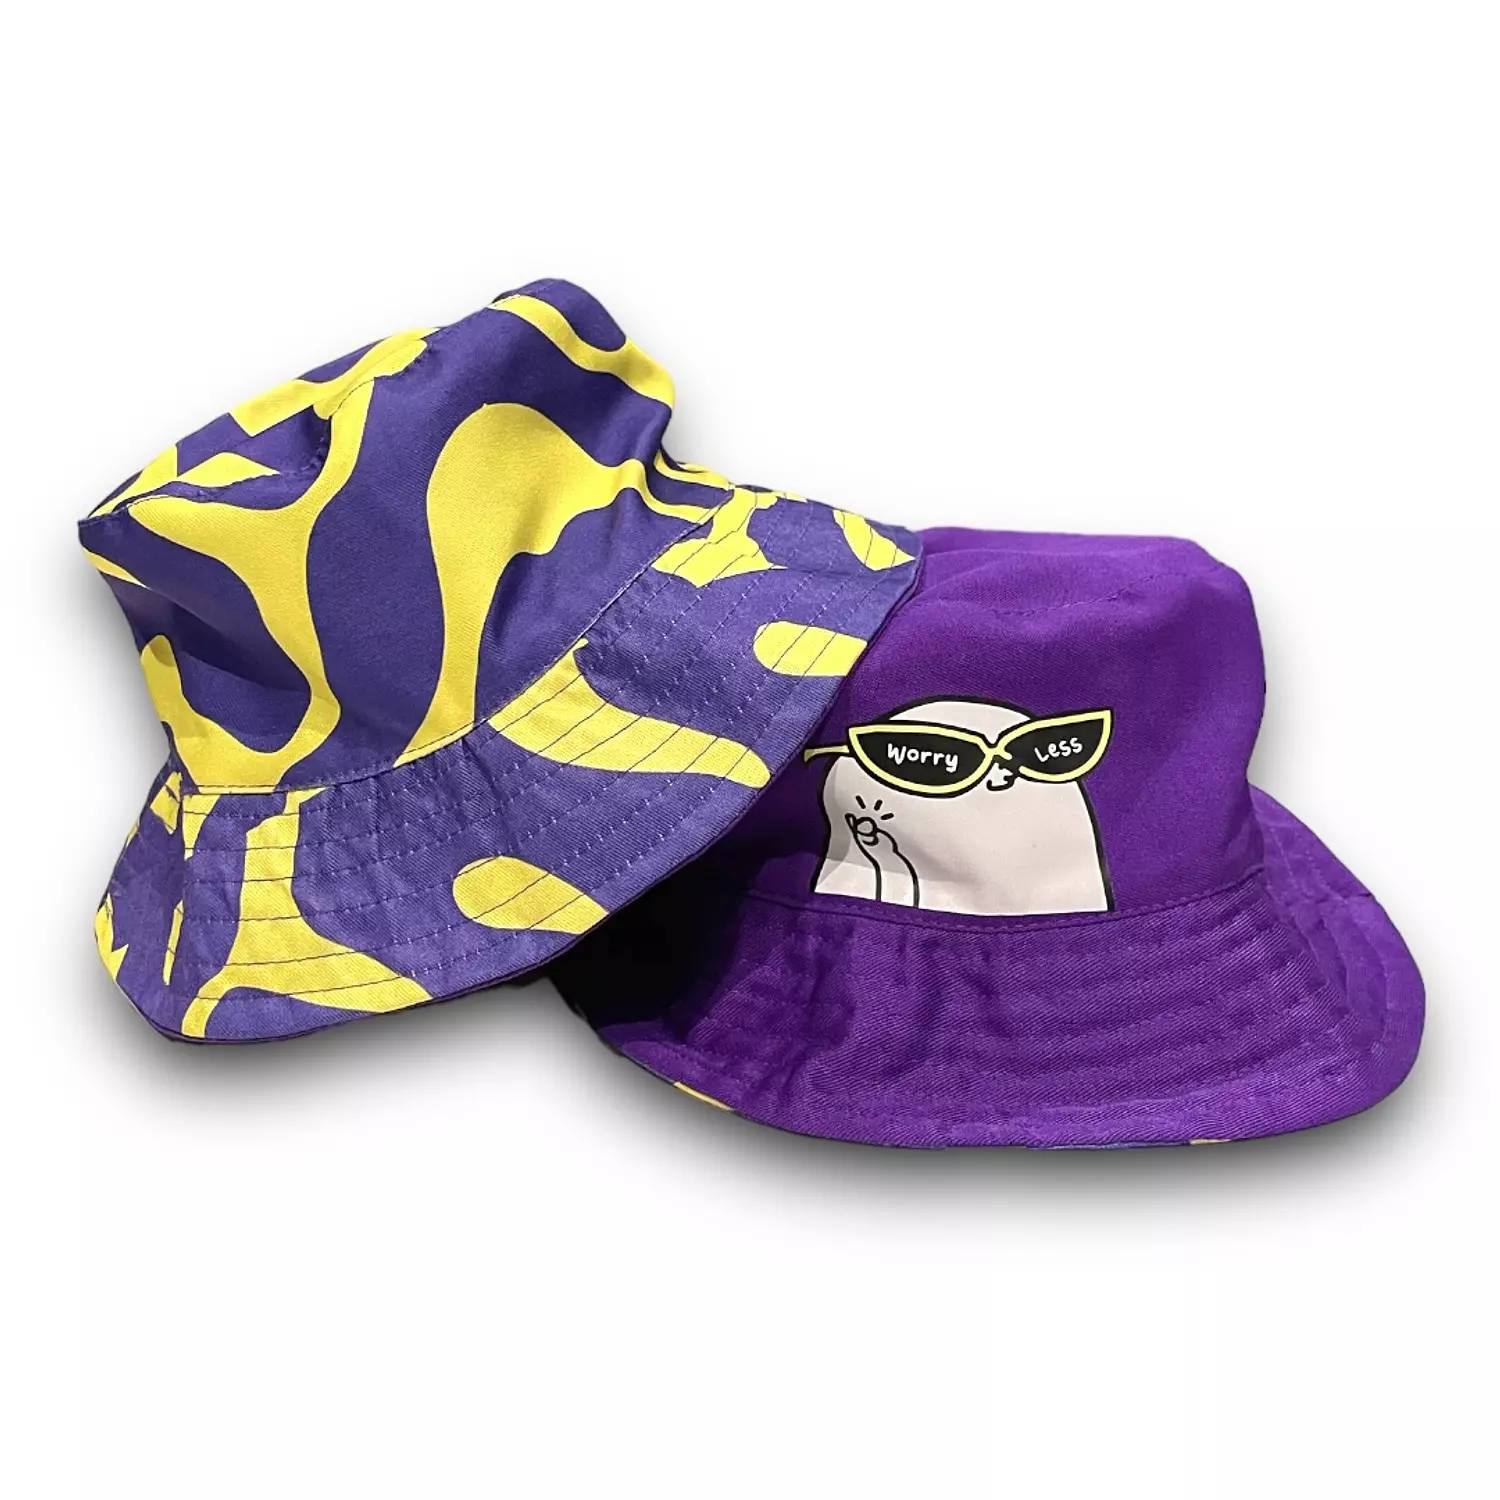 Worry Less Bucket Hat hover image